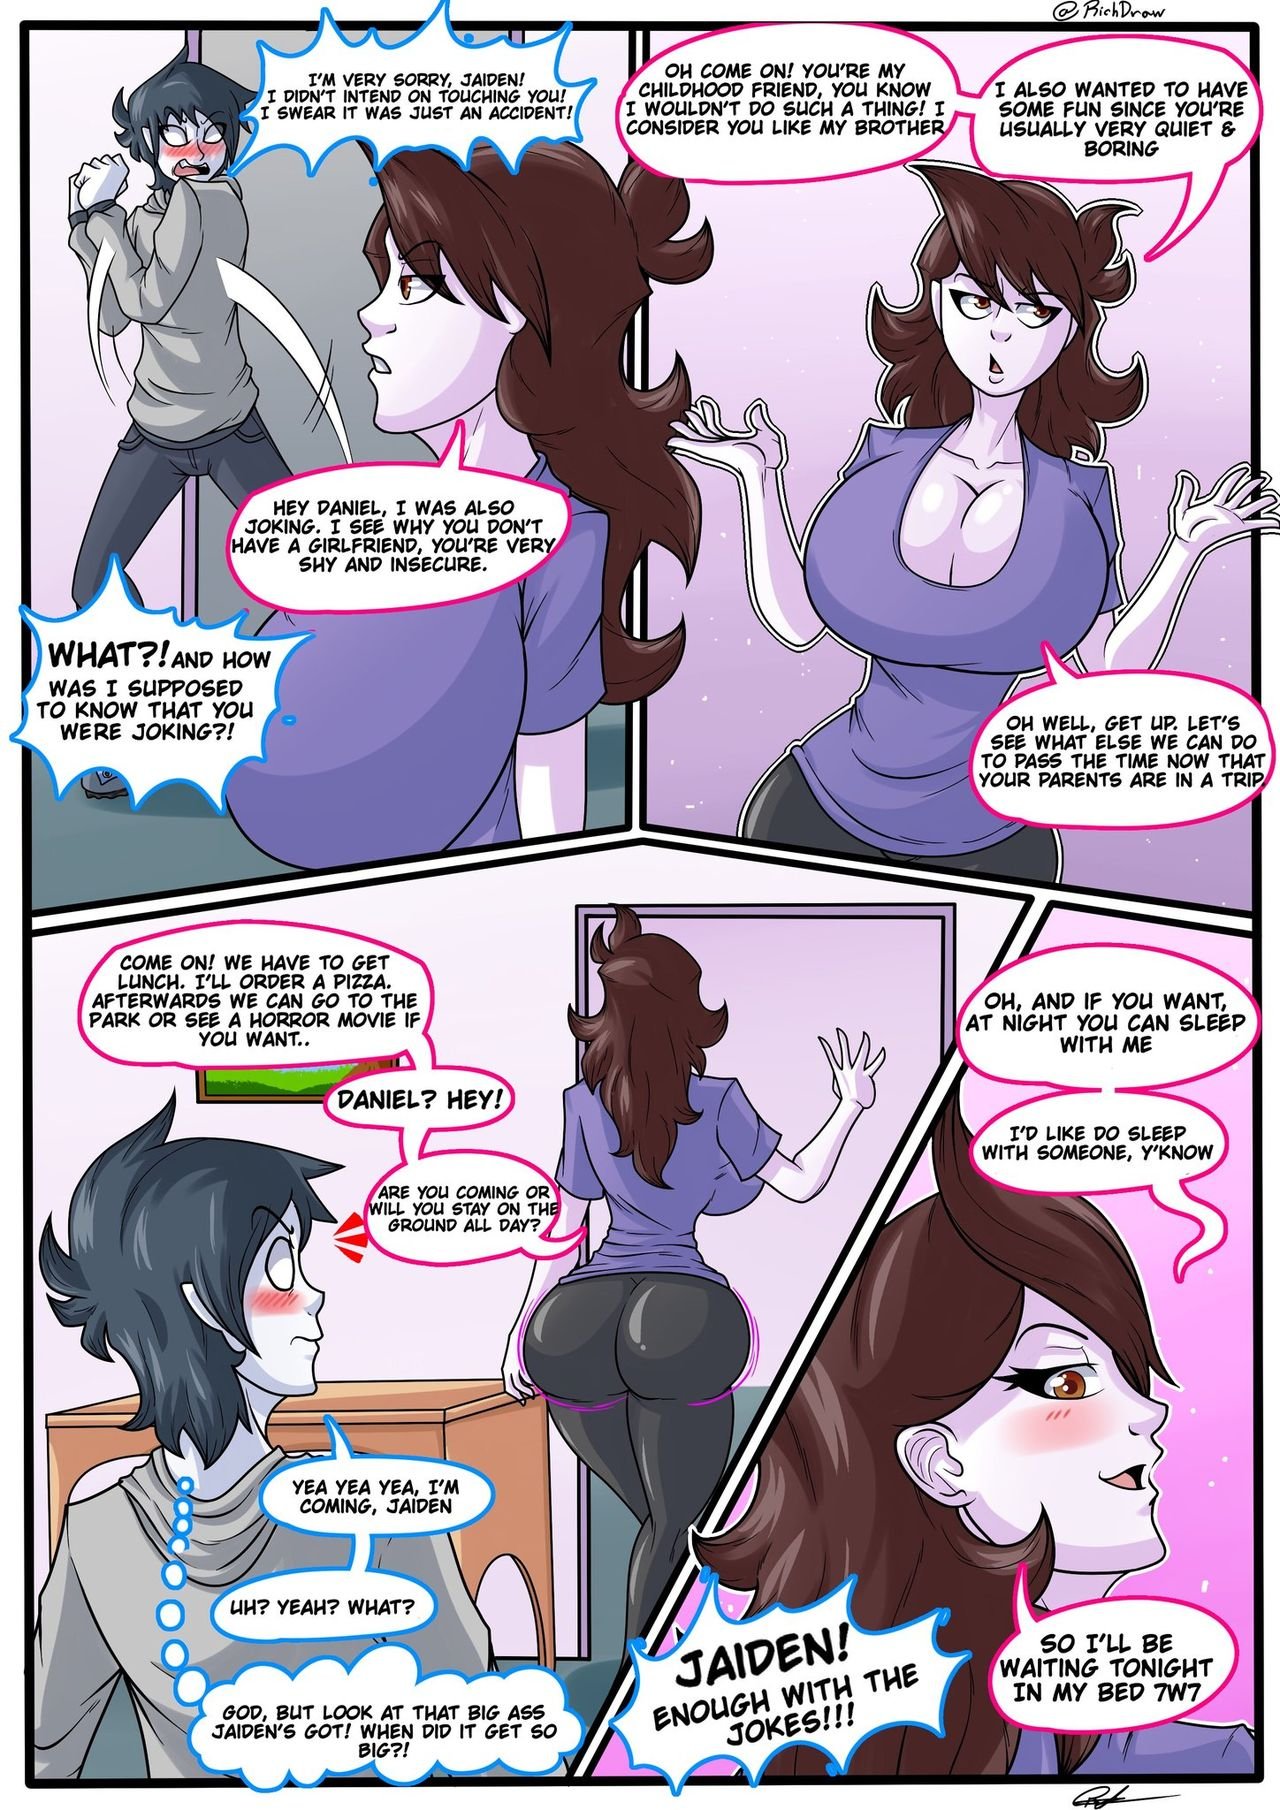 Caring For My Best Friend -Ongoing- comic porn HD Porn Comics